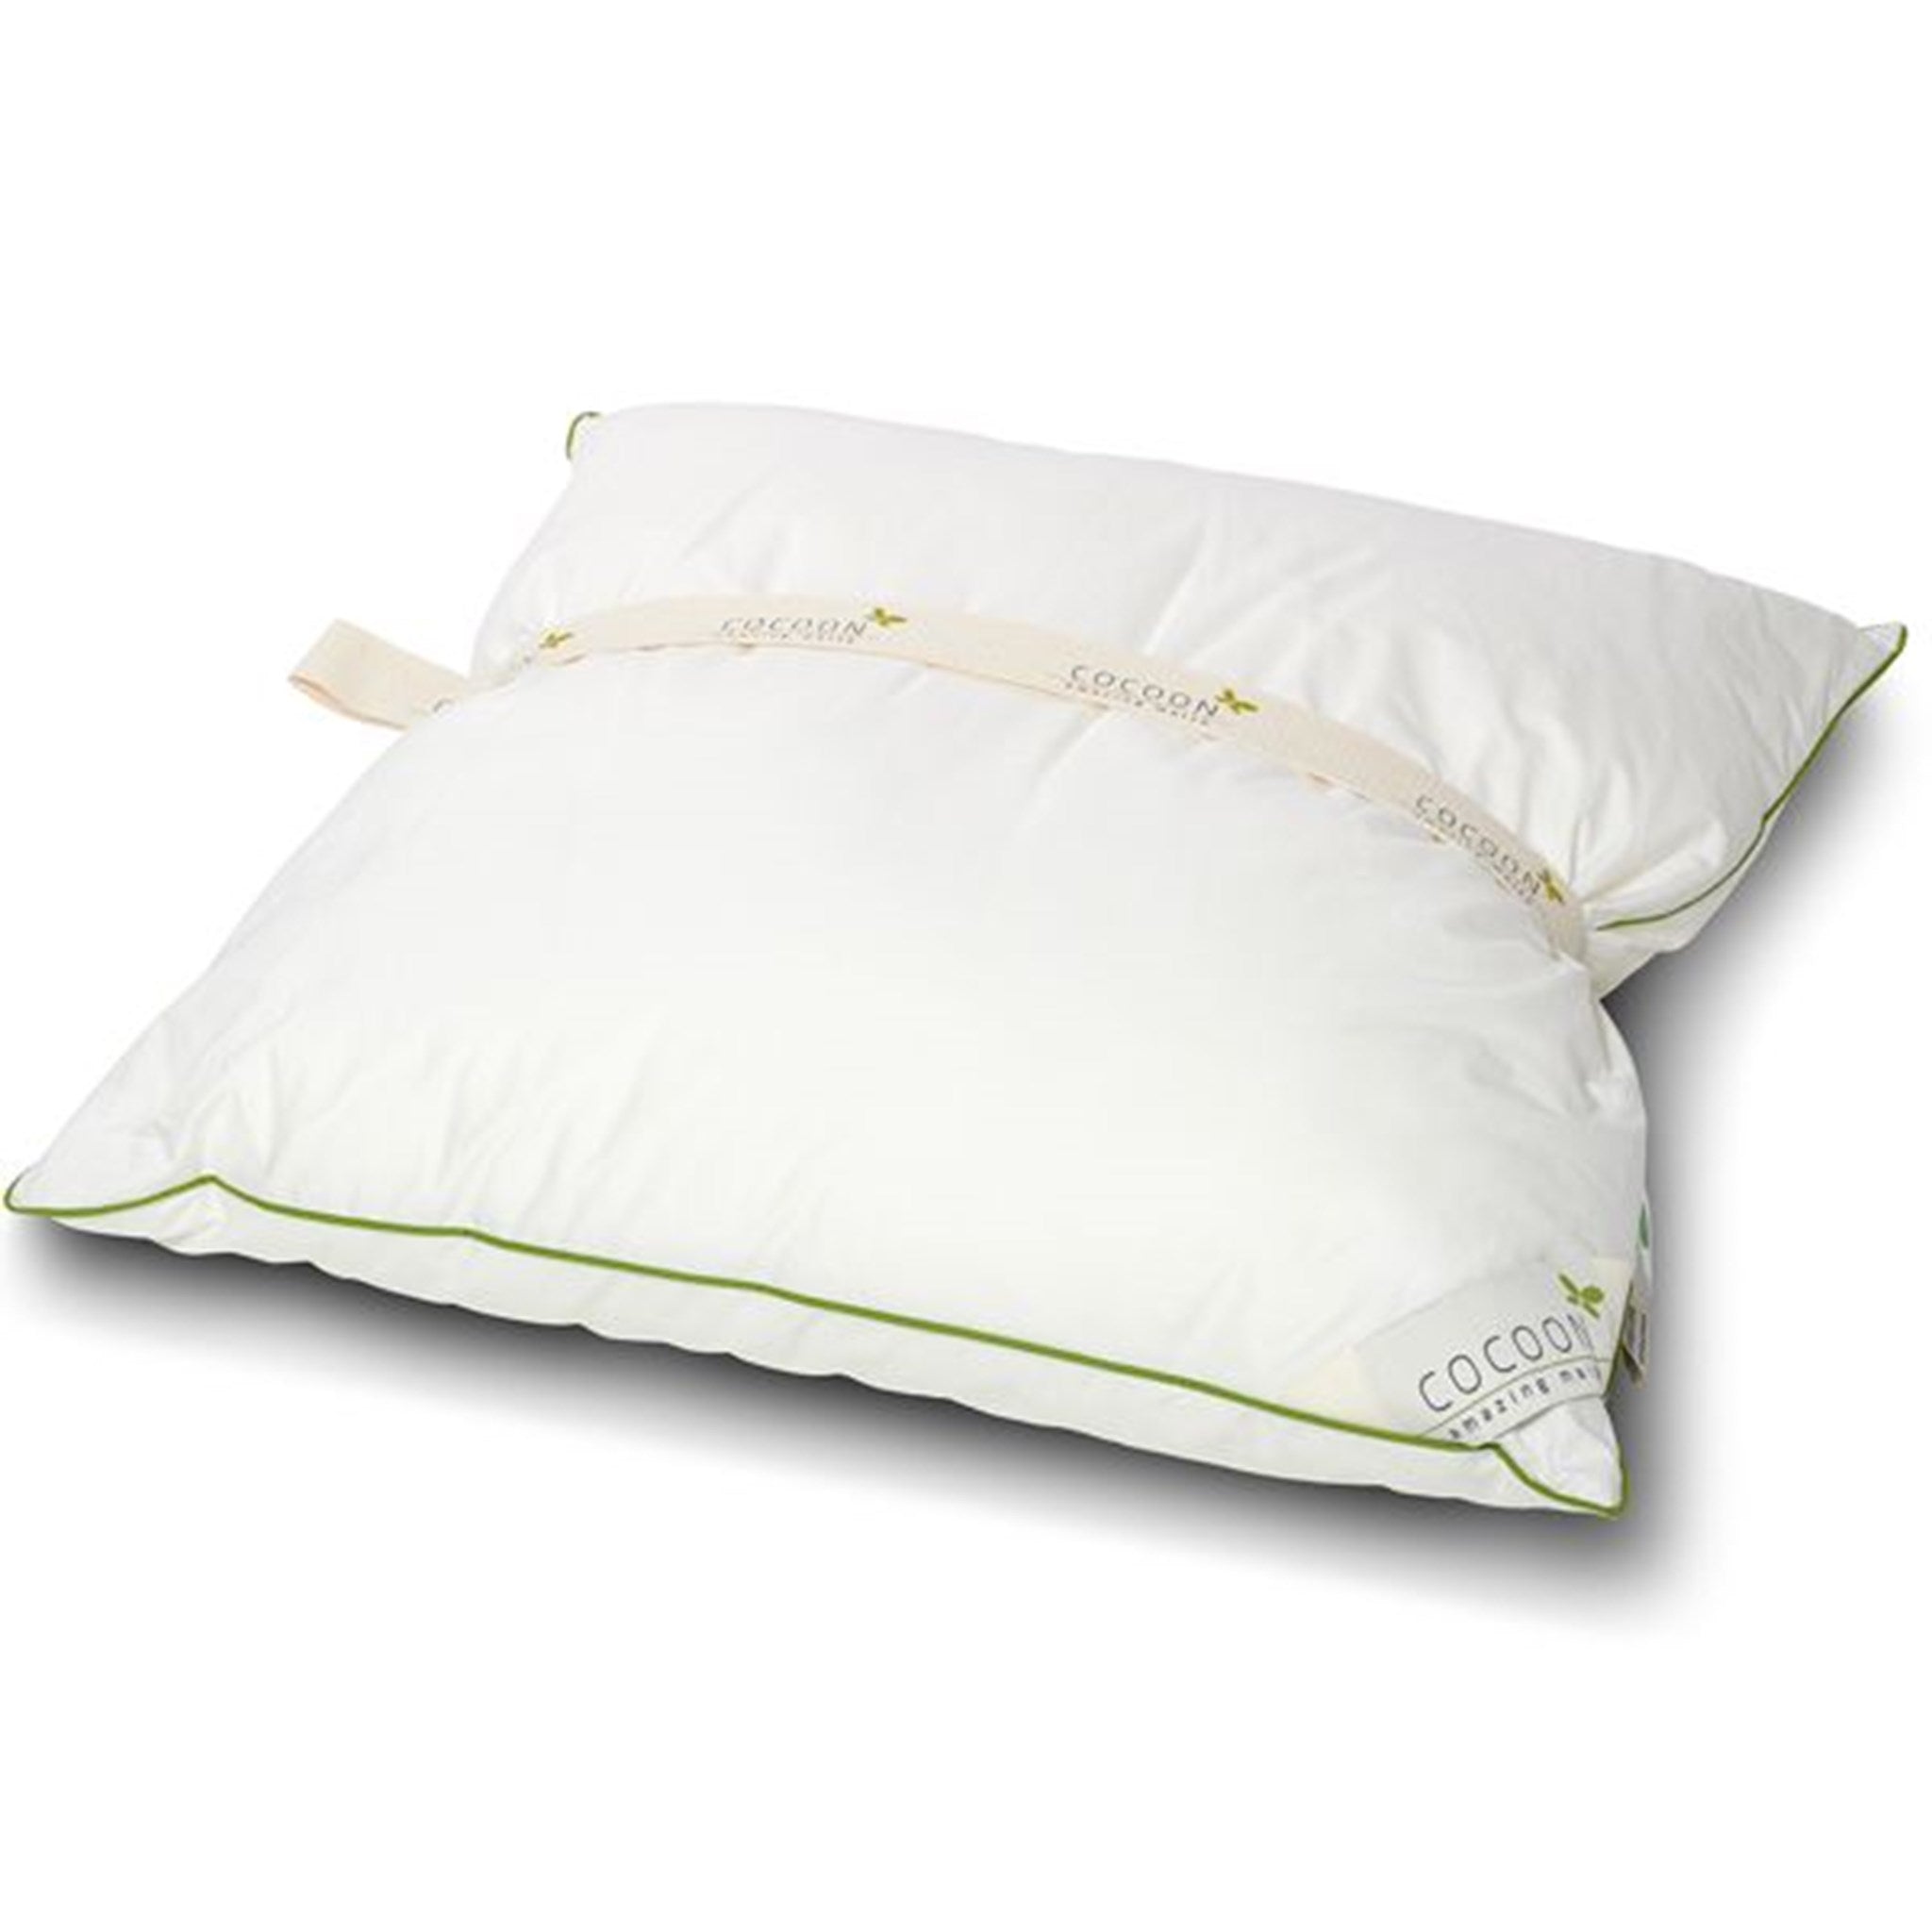 Cocoon Amazing Maize Adult Pillow